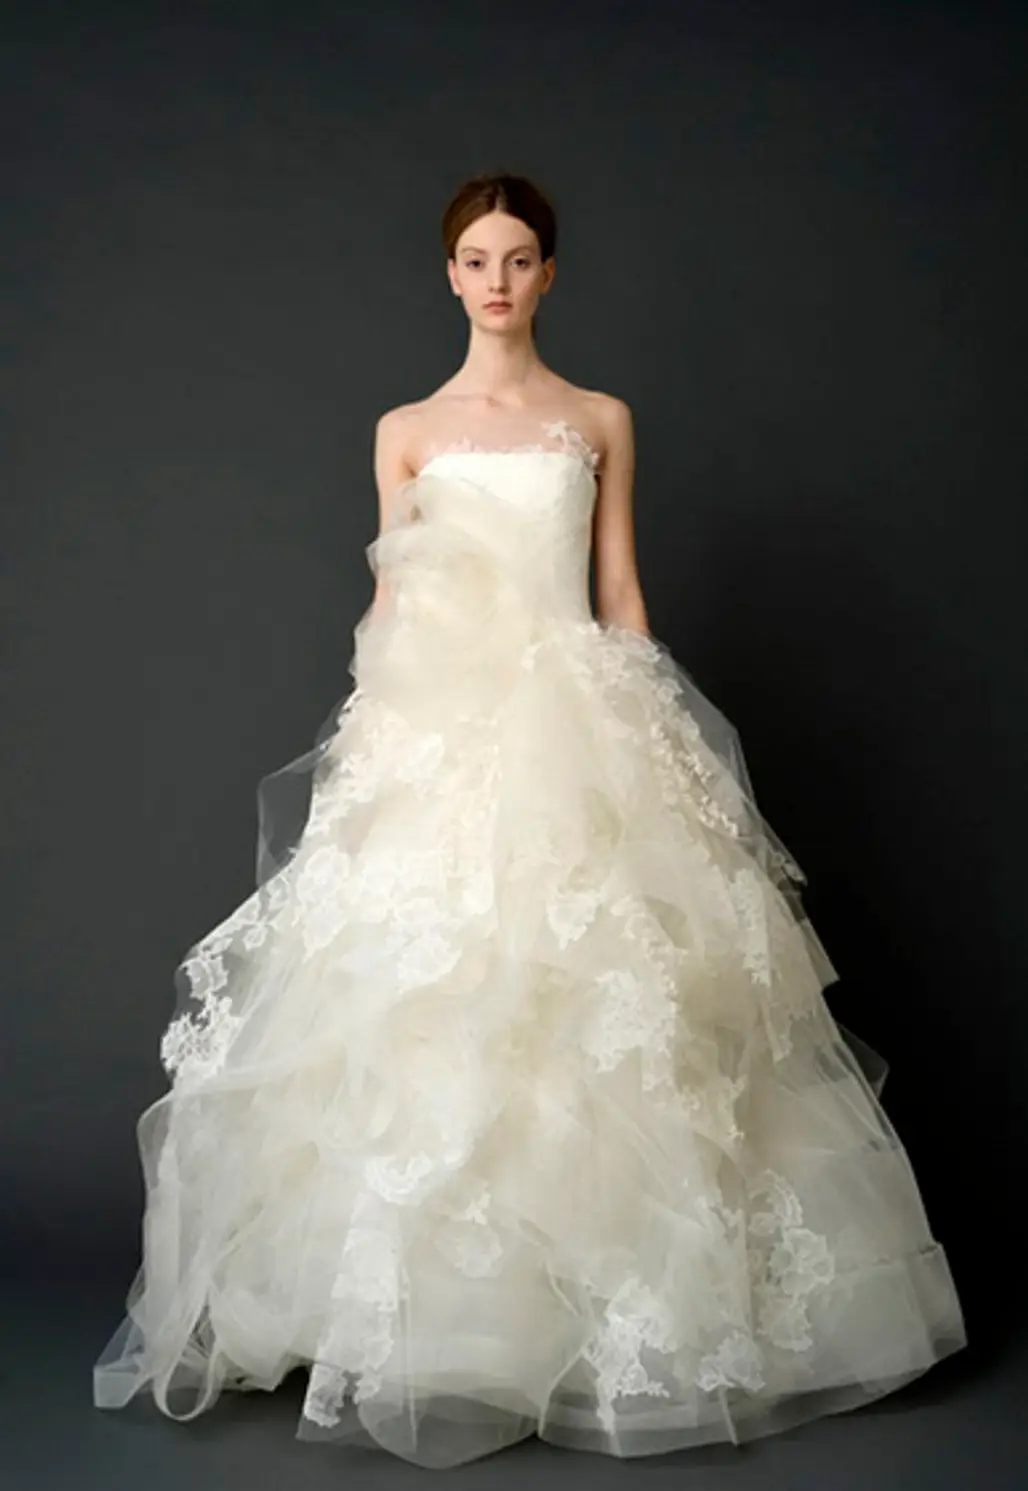 Vera Wang "Helena" Ivory Strapless Ballgown with Appliques and Full Organza Skirt